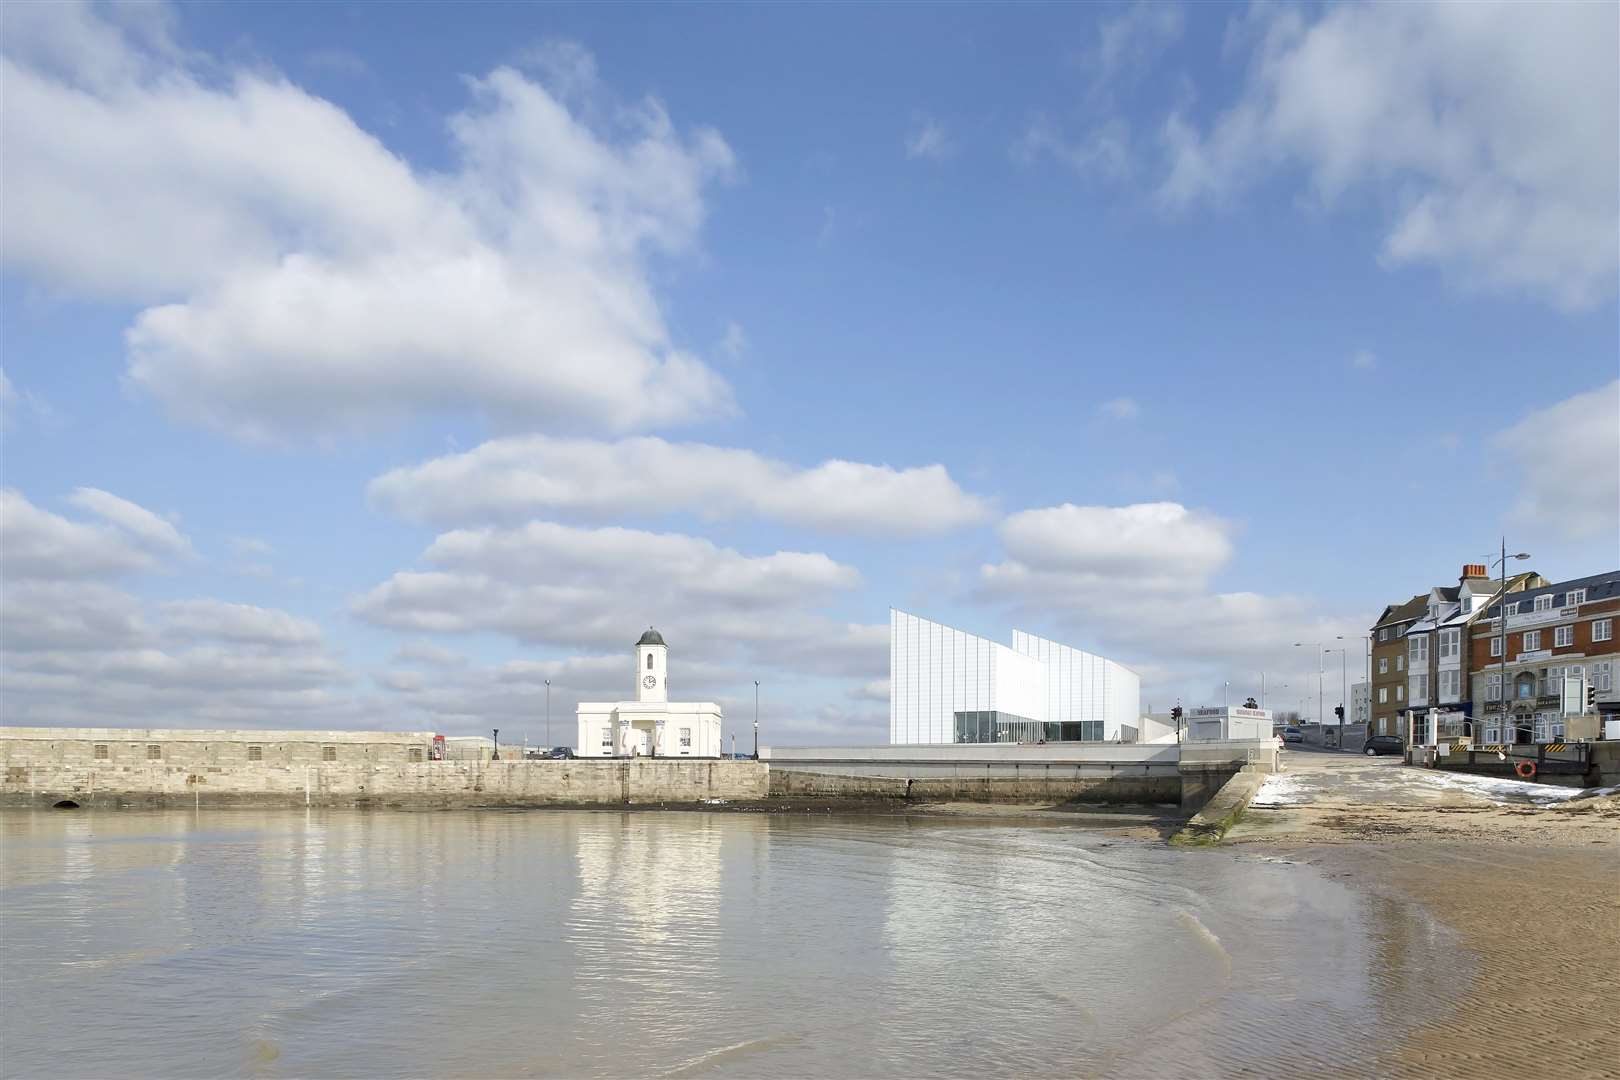 Turner Contemporary will be closed for five months while upgrades take place (Credit Hufton and Crow)